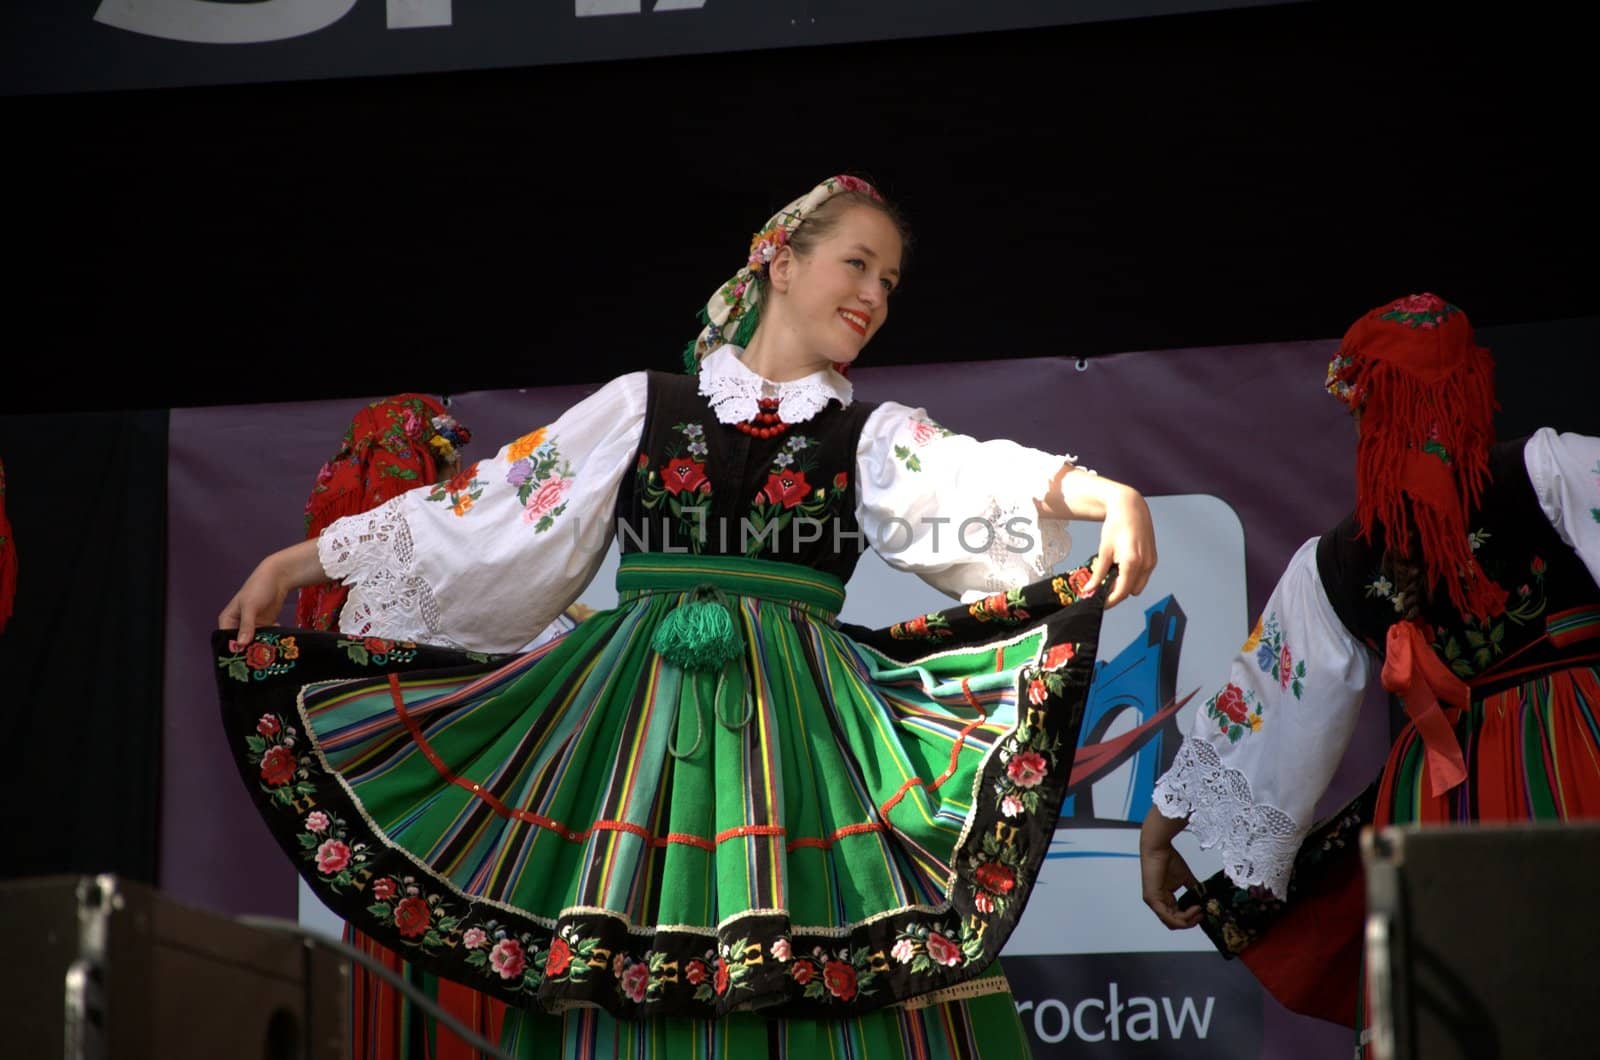 WROCLAW, POLAND - JUNE 15:  Members of Folk Dance group "Wroclaw" perform on Euro 2012 fanzone stage on June 15, 2012 in Wroclaw.  